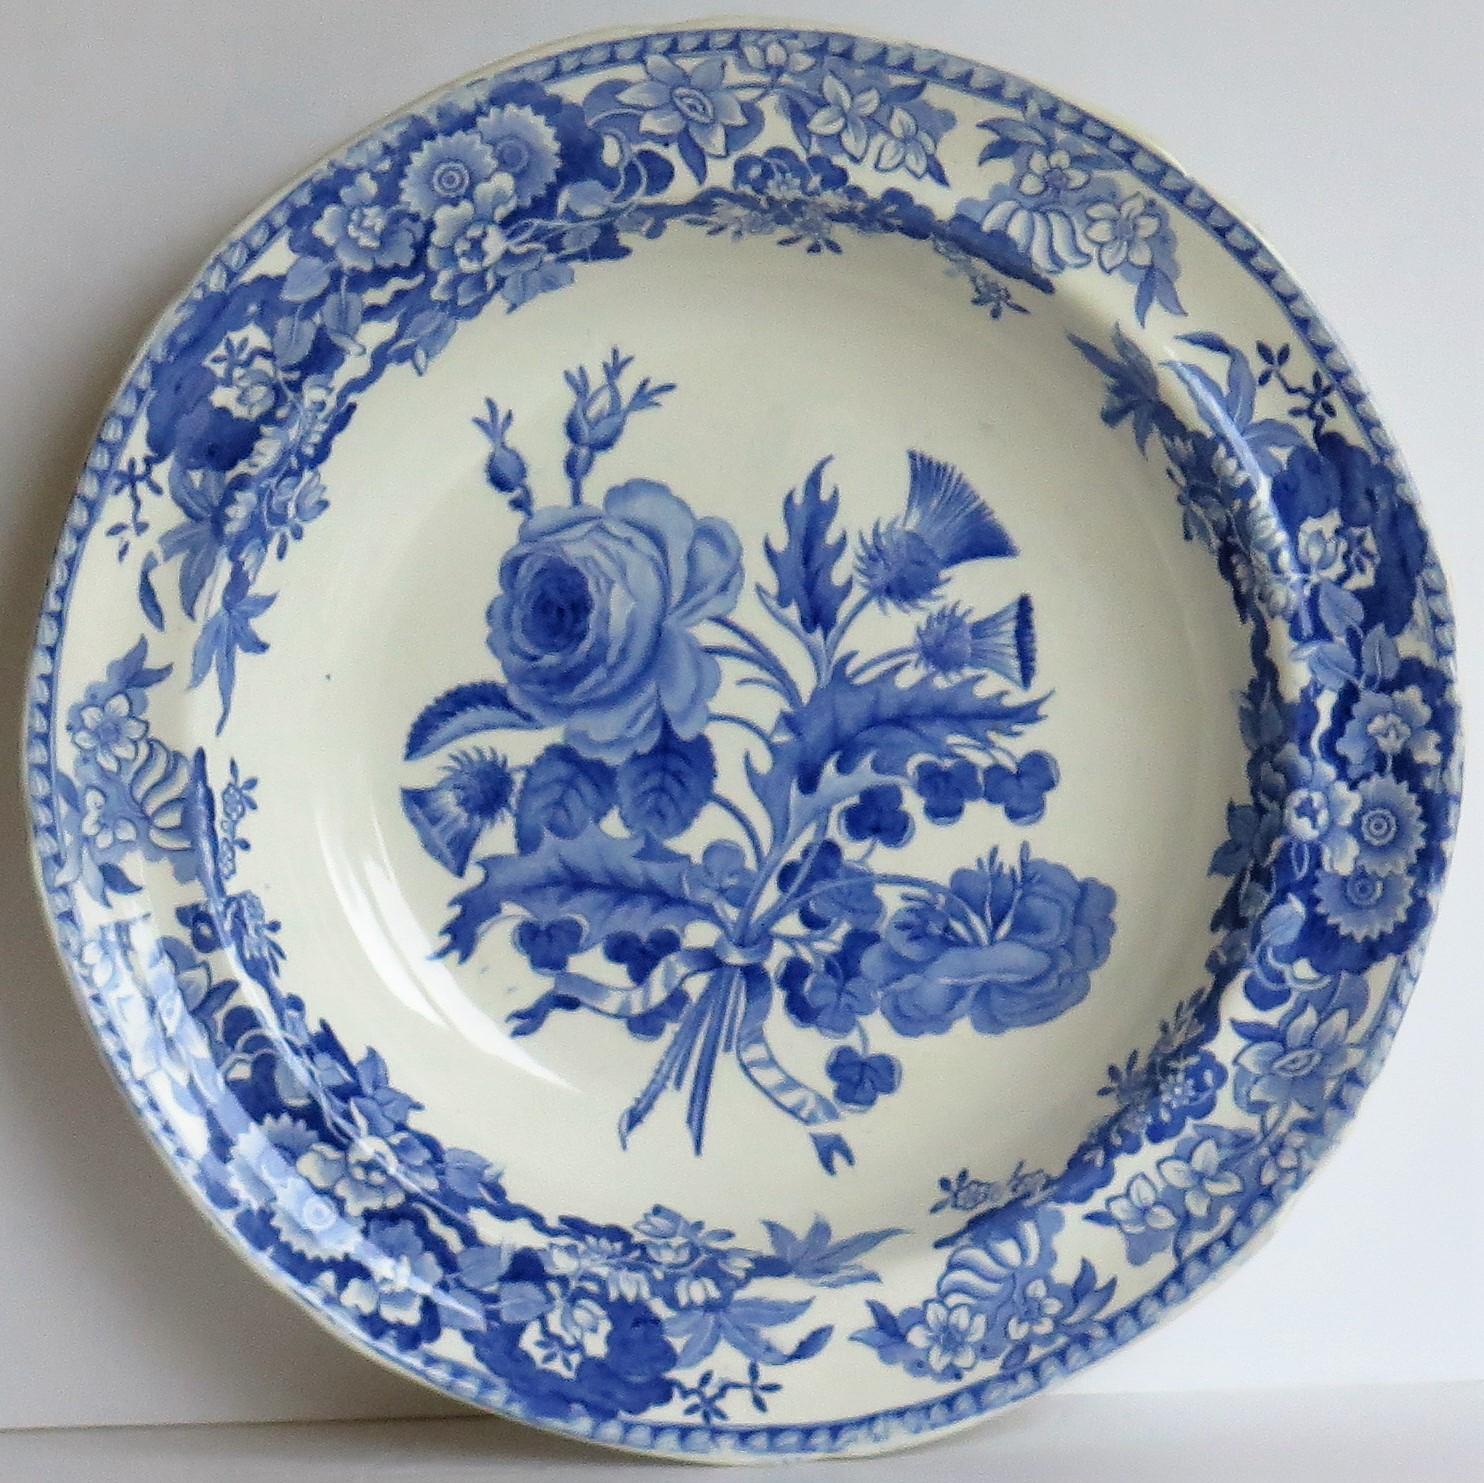 19th Century Georgian Plate or Bowl by Spode in Blue and White Union Wreath Ptn No.3, Ca 1820